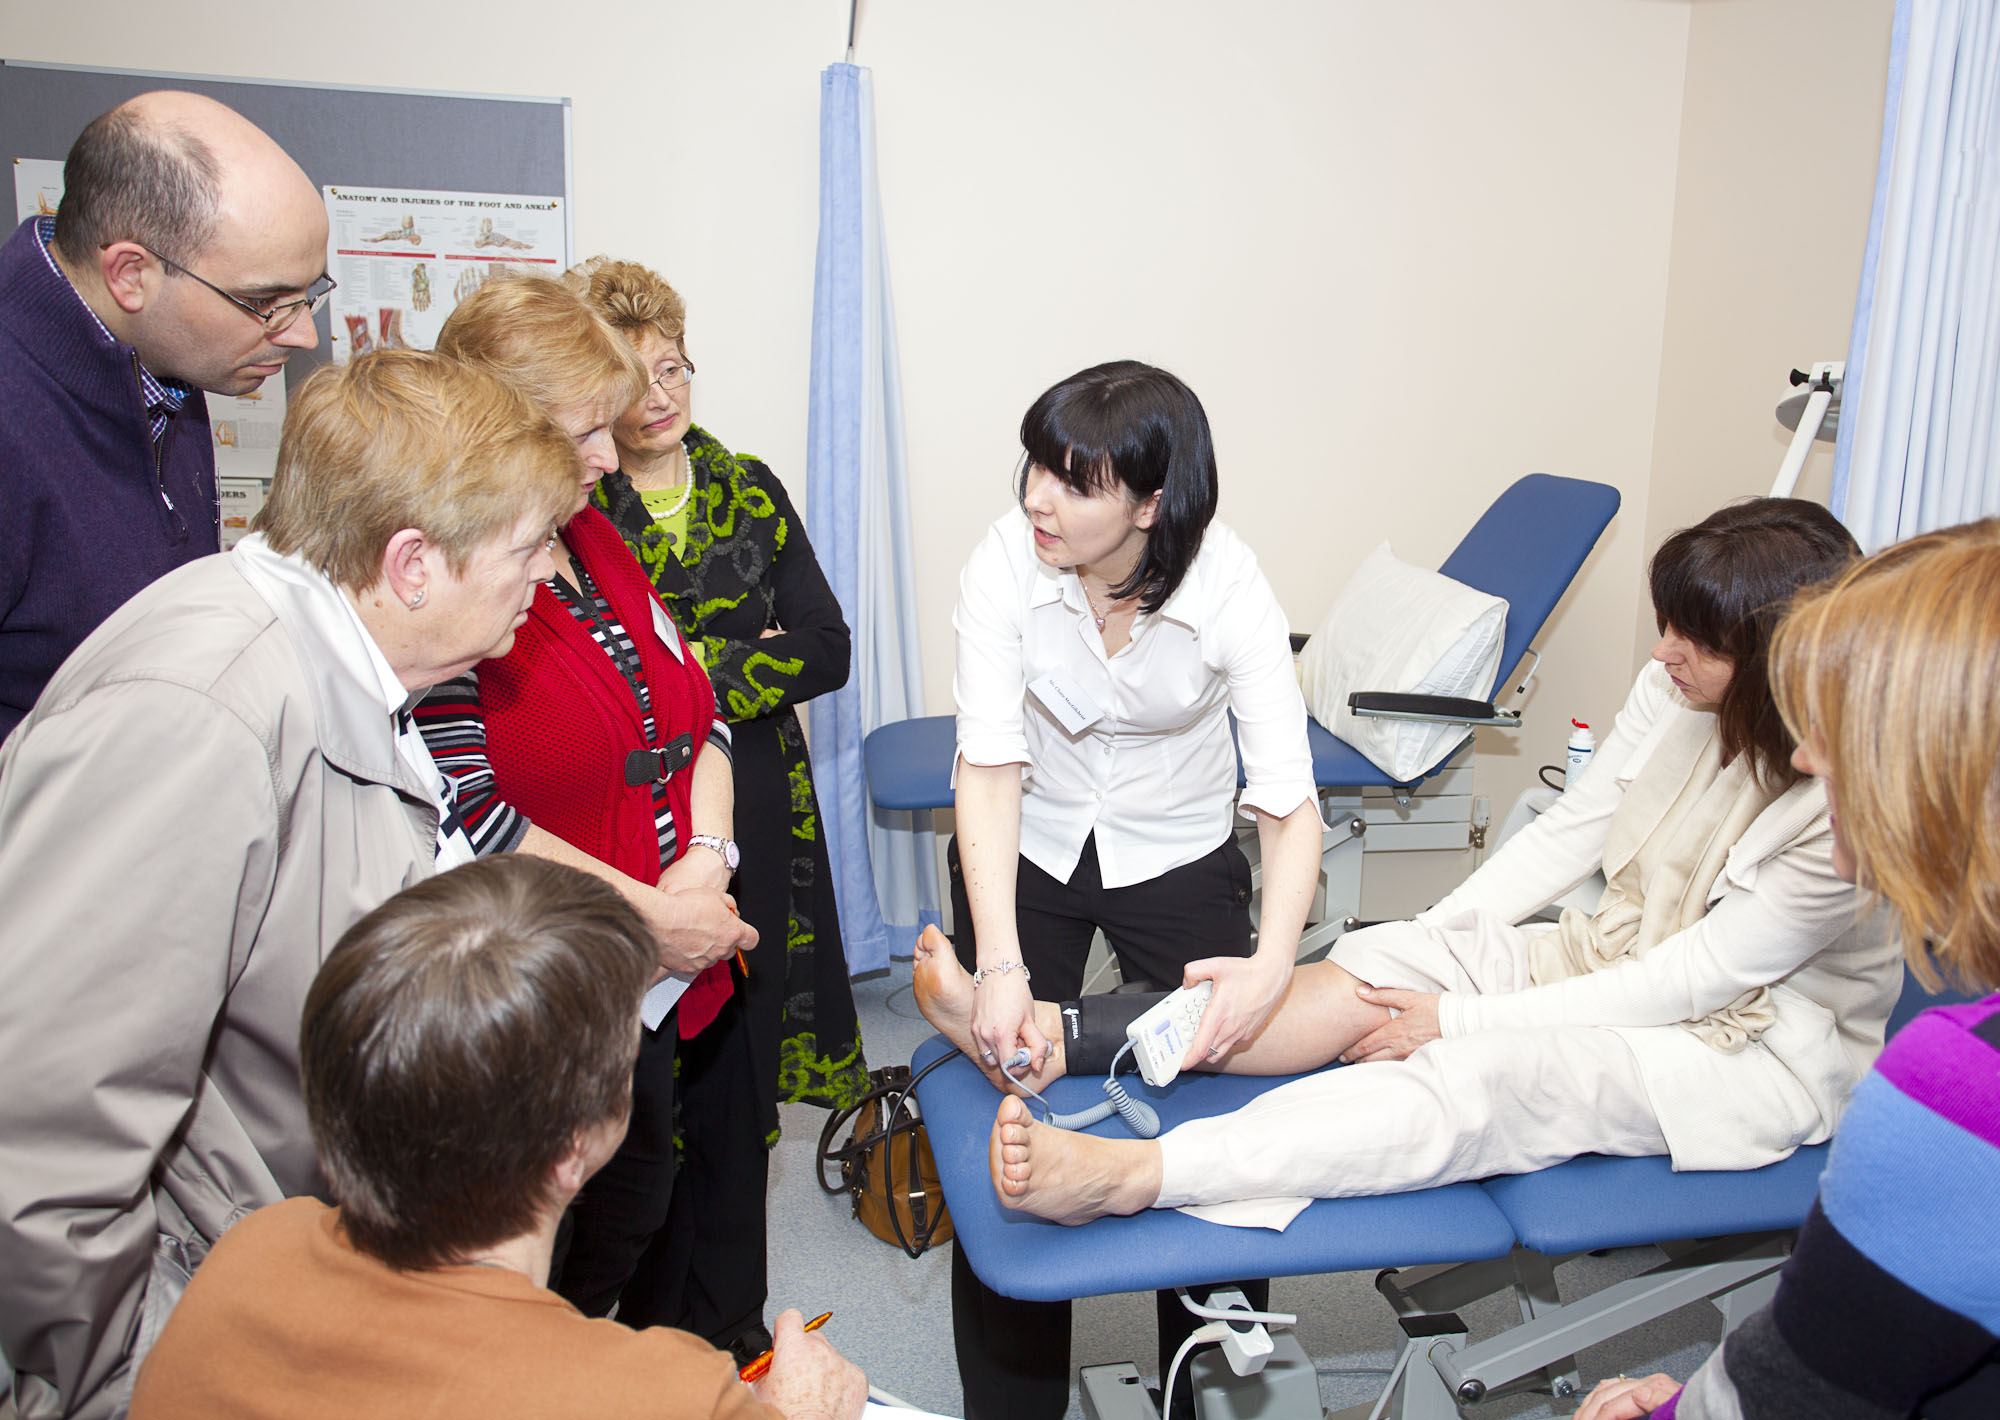 Foot Health Podiatry Clinic offers the latest treatment for arthritis  By Karen Fahy